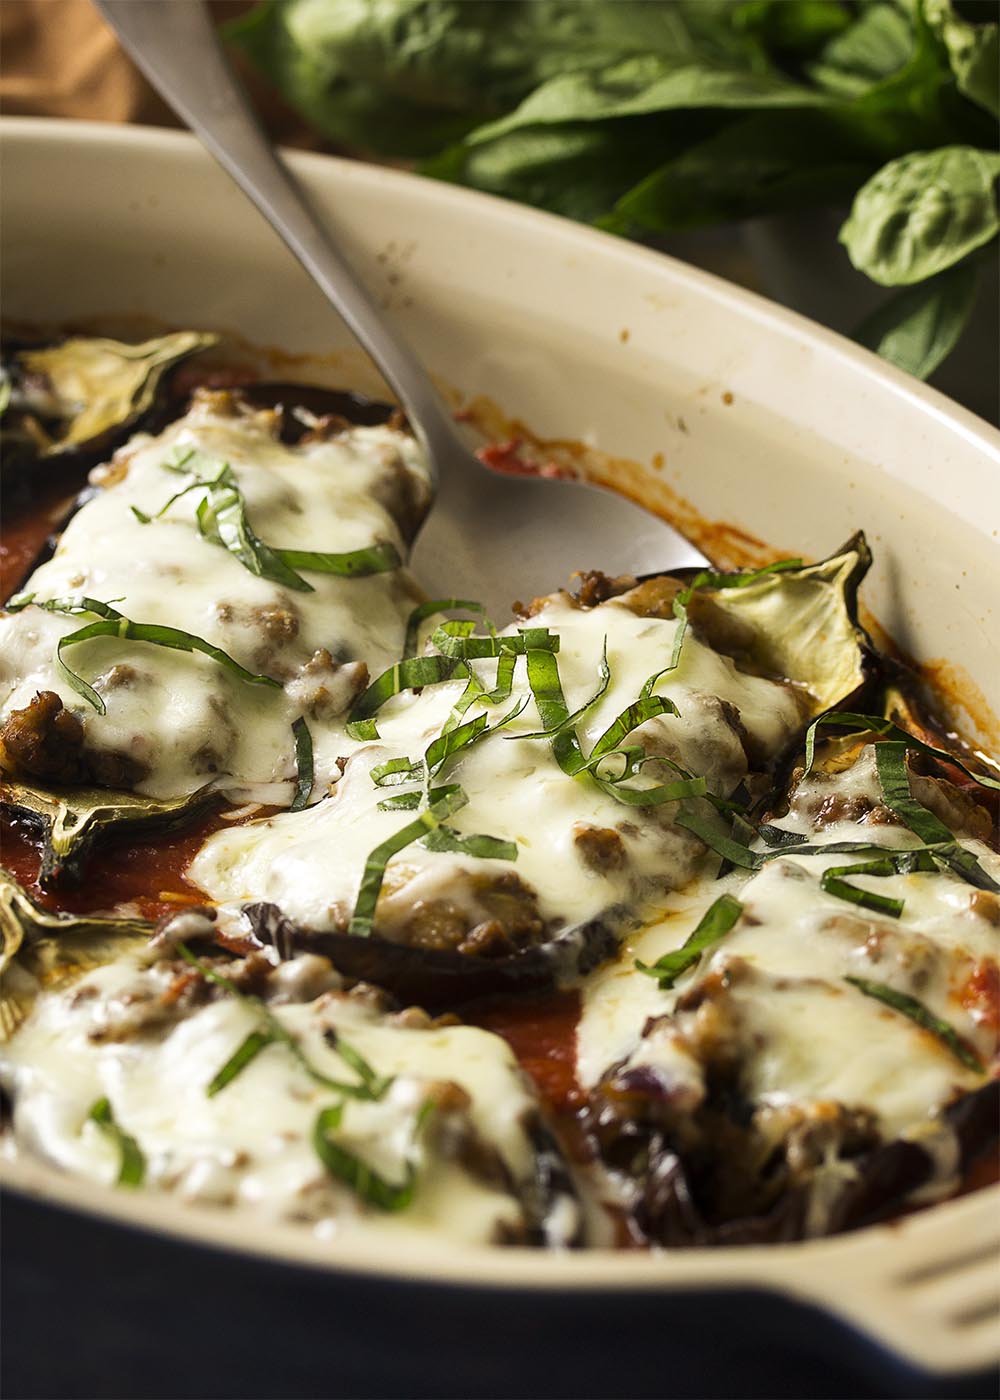 For a fun and tasty way to enjoy eggplant, try stuffed eggplant parmesan! The eggplants are stuffed with ground beef, topped with plenty of mozzarella cheese, and baked in the oven until browned and gooey. Gluten-free. | justalittlebitofbacon.com